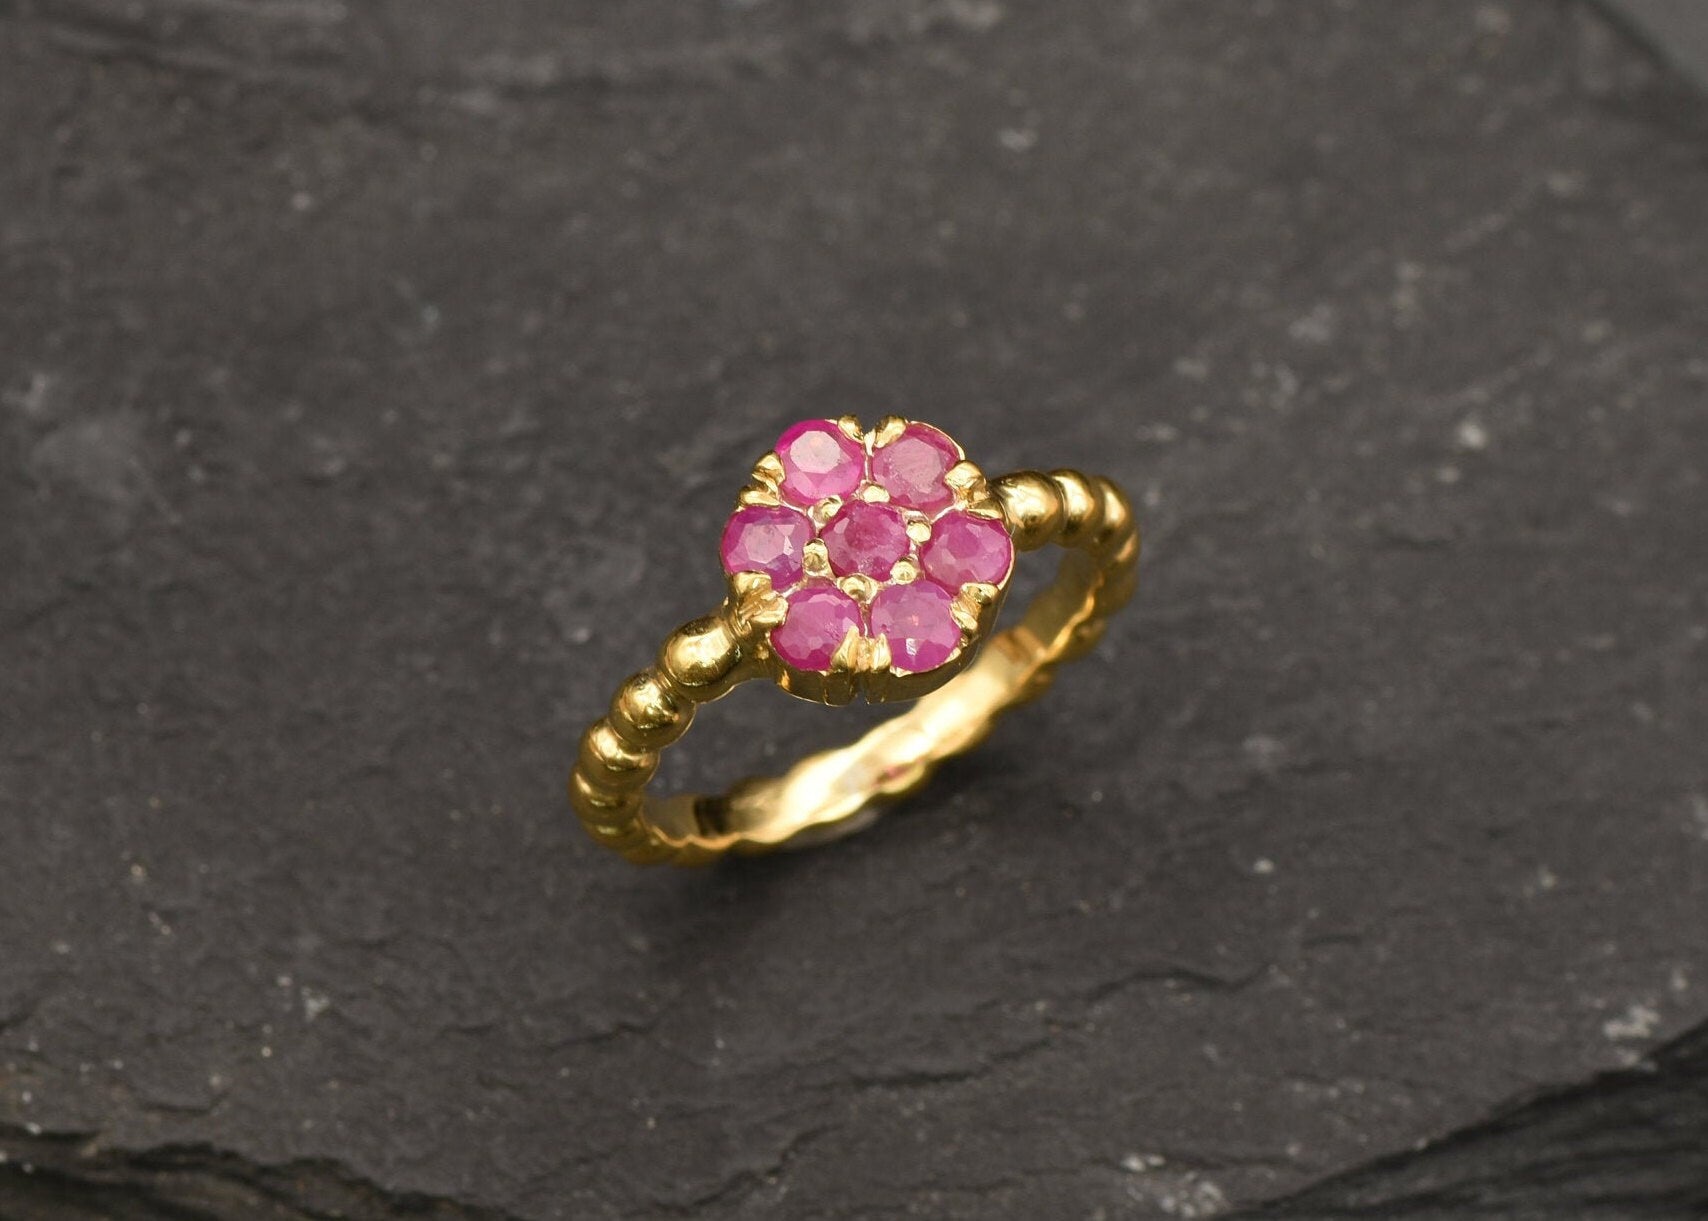 Gold Ruby Ring, Natural Ruby, Red Flower Ring, Daisy Ring, July Birthstone, Stackable Ring, Dainty Bubble Band, Gold Plated Ring, Vermeil